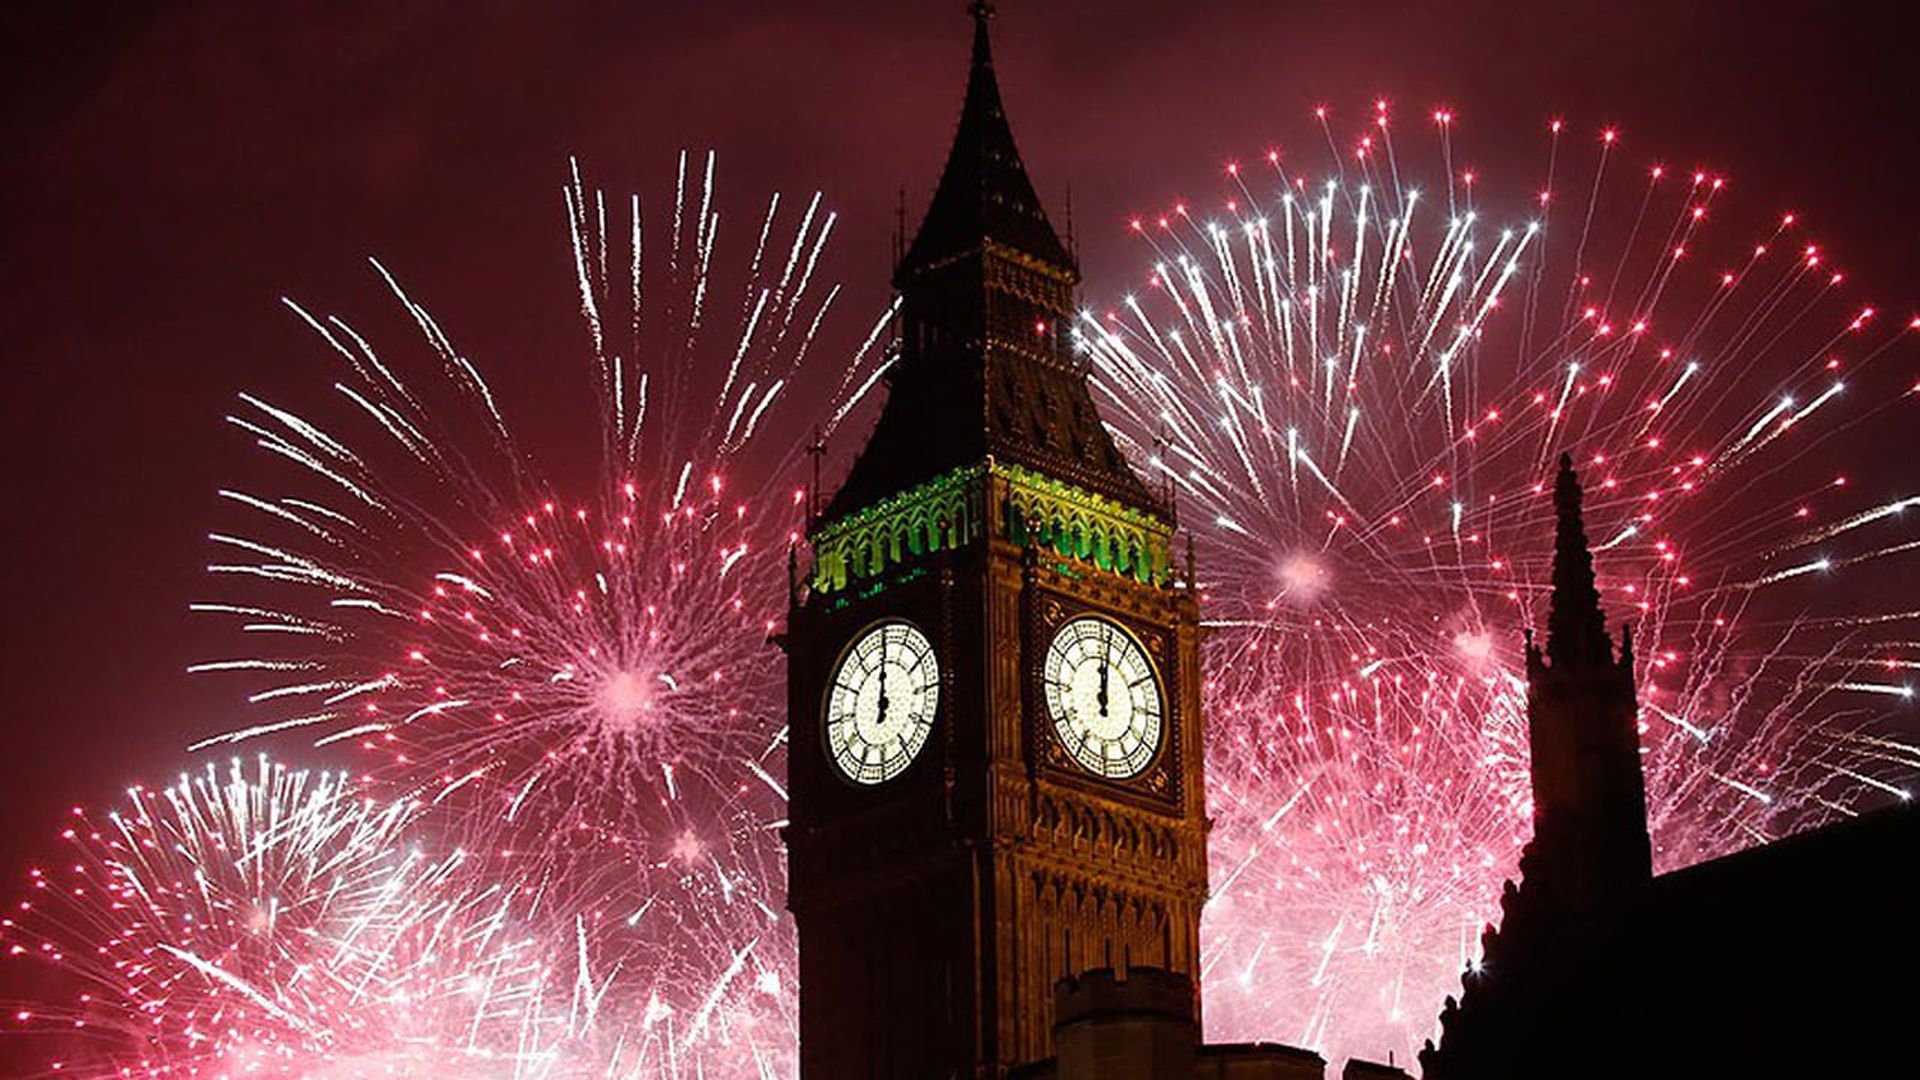 New Years Eve Fireworks In London Big Ben Clock In London Desktop HD Wallpaper For Mobile Phones Tablet And Pc 1920x1080, Wallpaper13.com